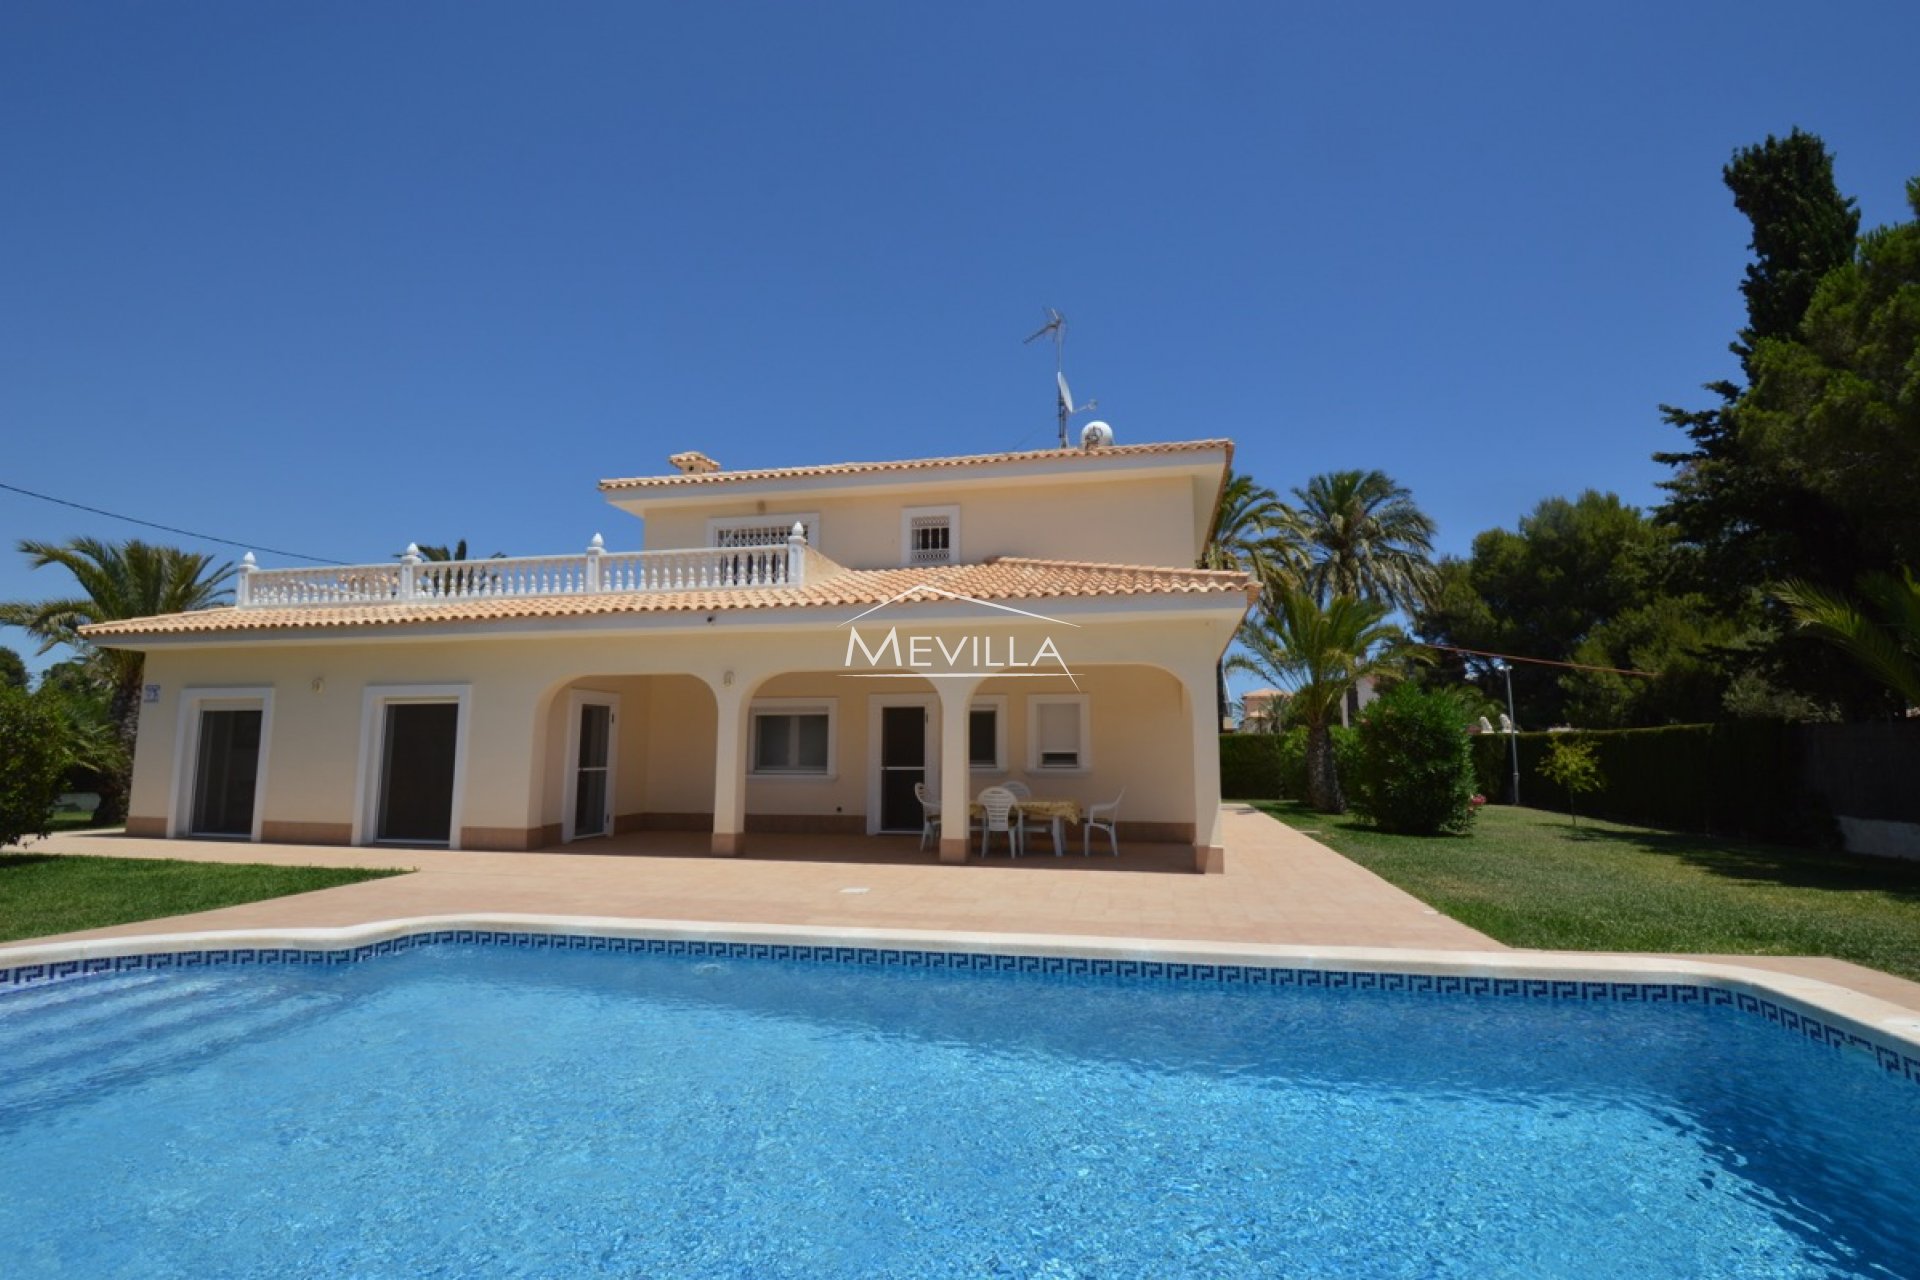 G VILLA WITH POOL ONLY 300 M FROM CABO ROIG BEACH